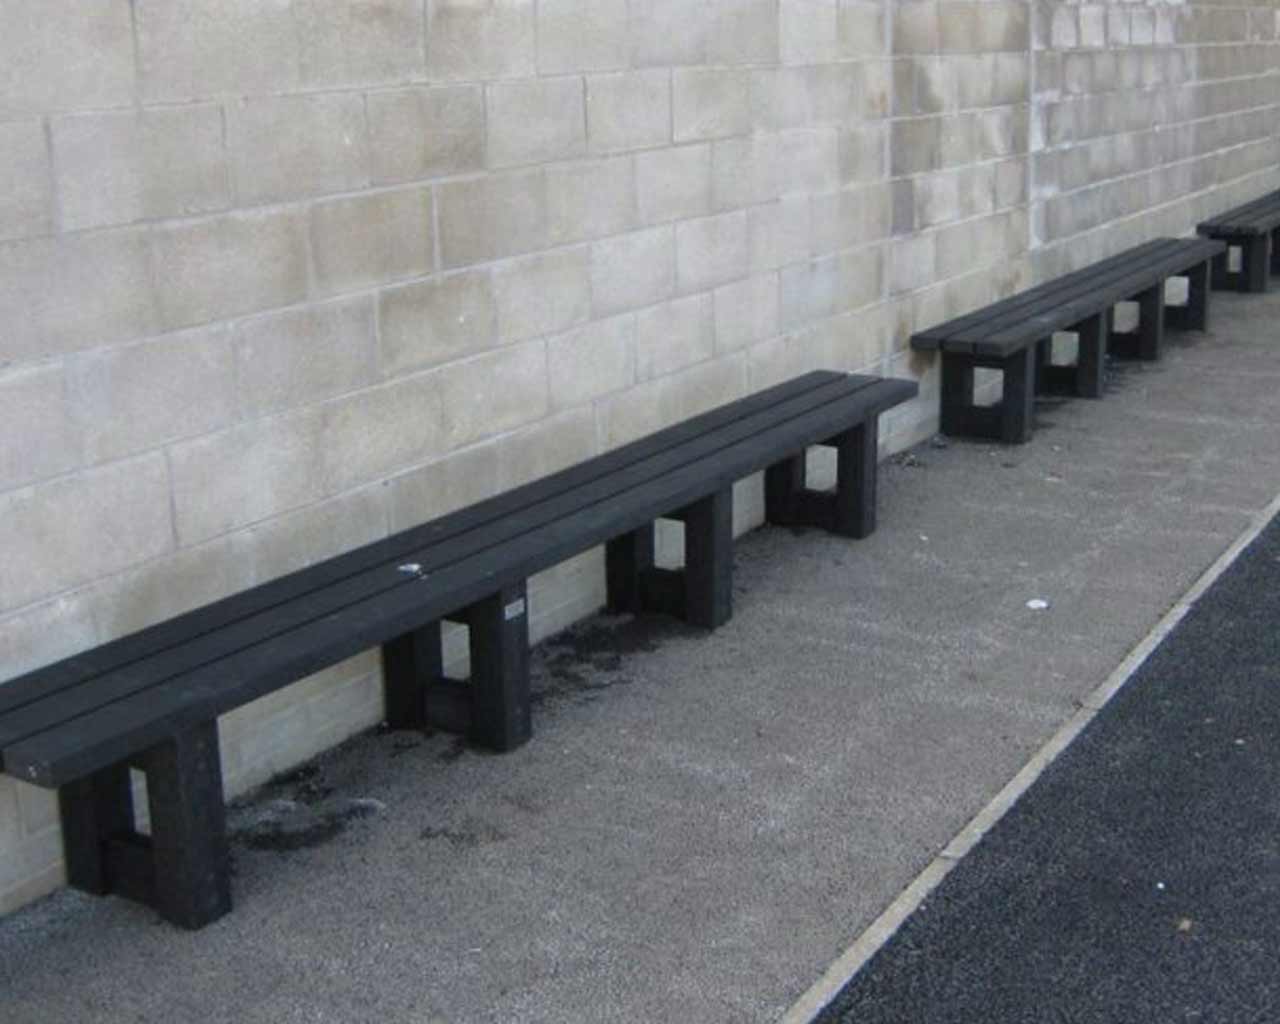 Claggan Bench Without Back